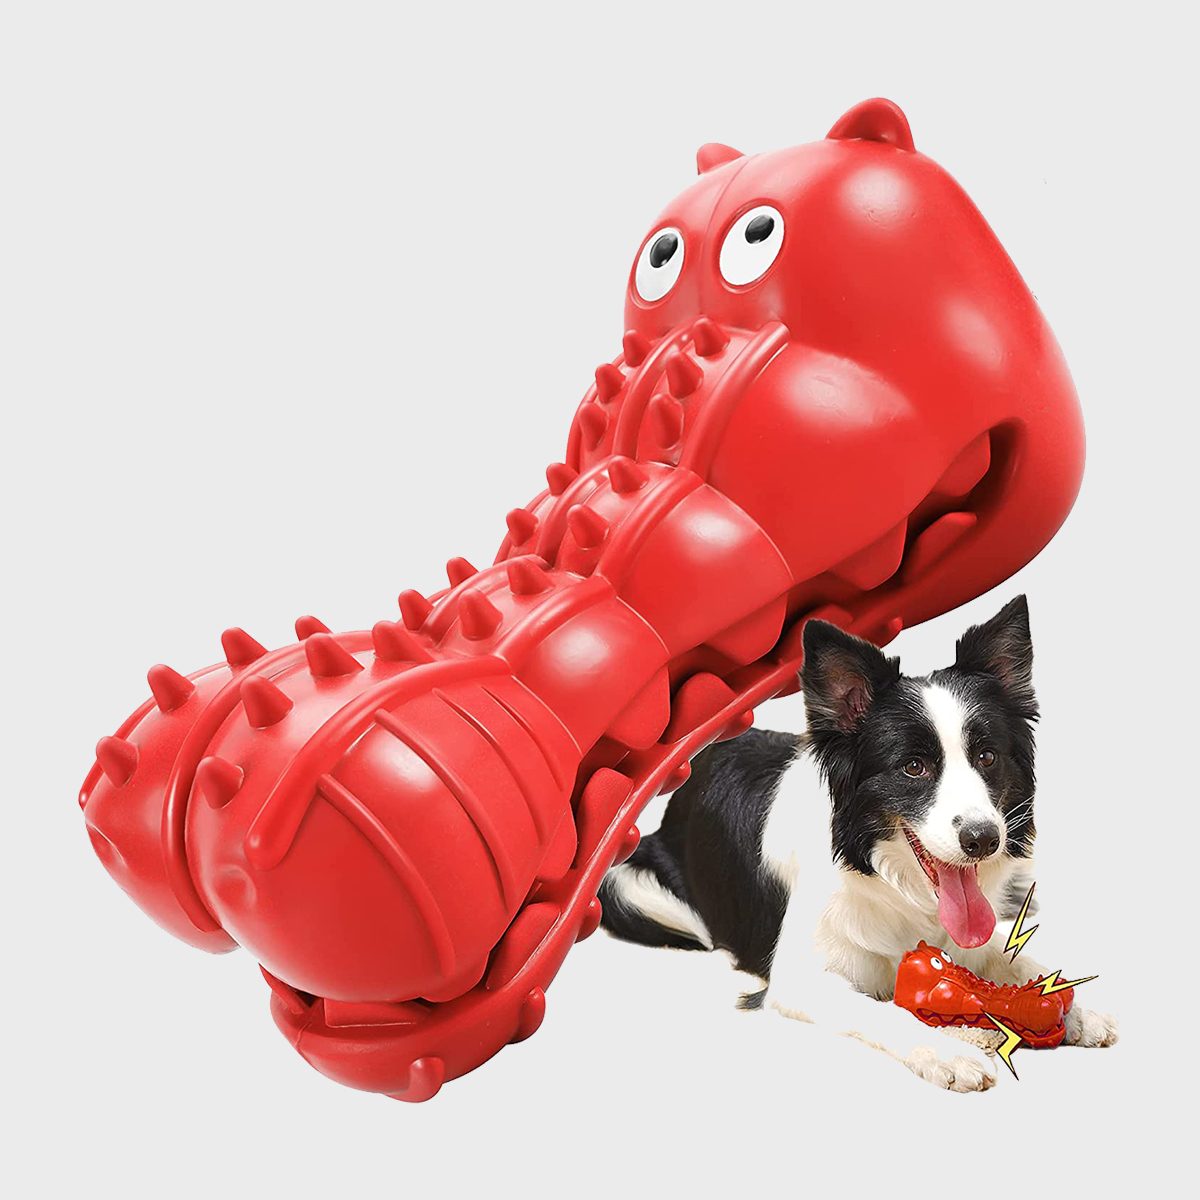 Durable Rubber Nearly Indestructible Training Toy Large Tough Dog